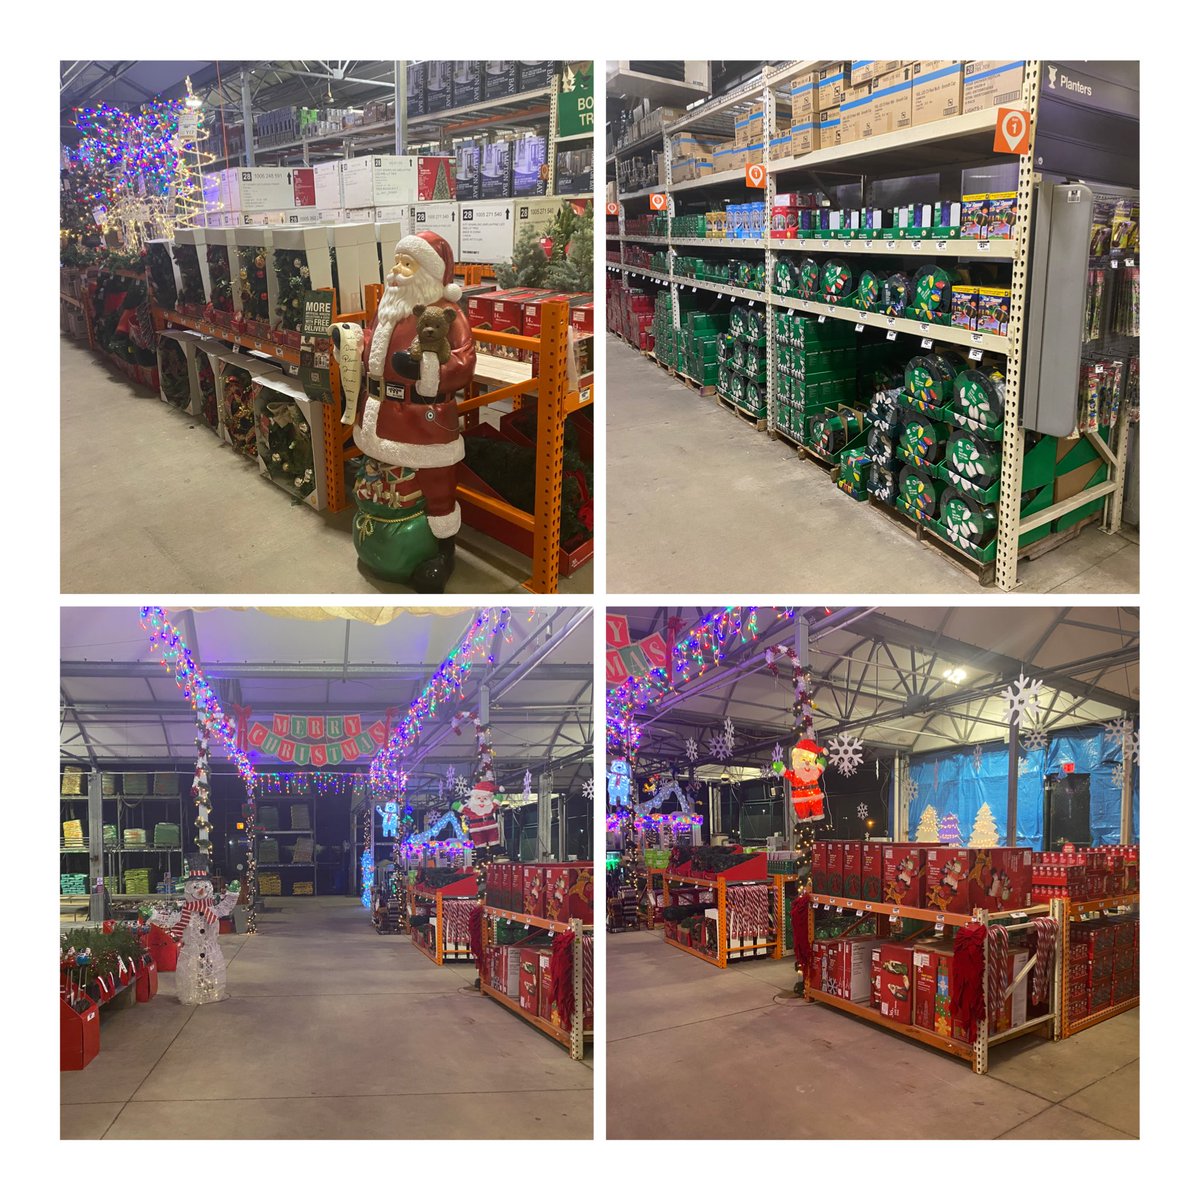 Feels like Christmas here at 2001 Southlake!!! Thank you to my team for doing an Outstanding job creating an emotional experience for our customers!!! 🎄 @IsmaelPerezJrHD @White2Dawn @Leslie51787166